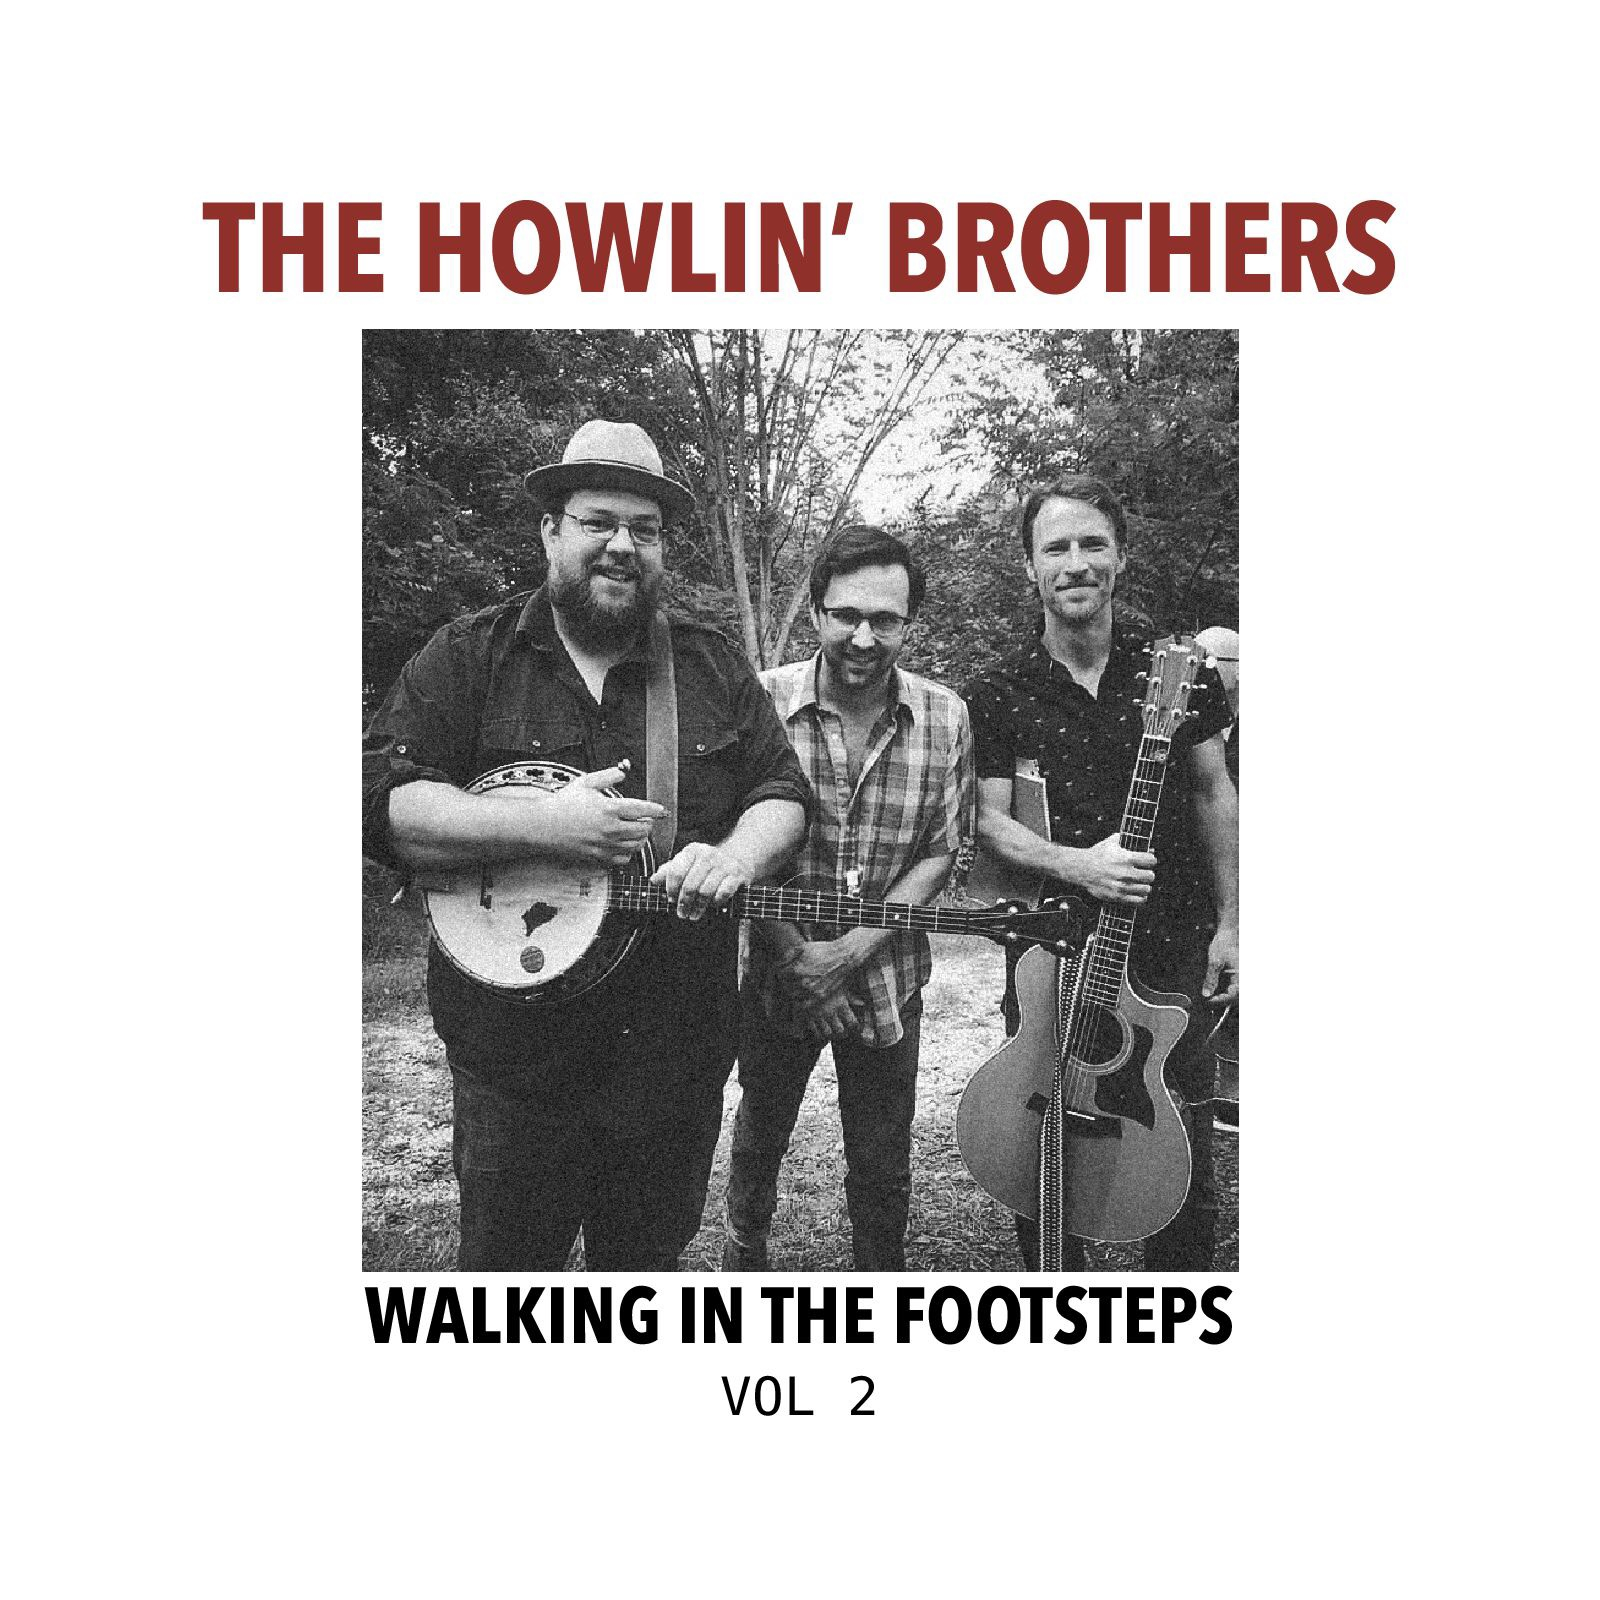 Walking in the Footsteps 2 (available now)